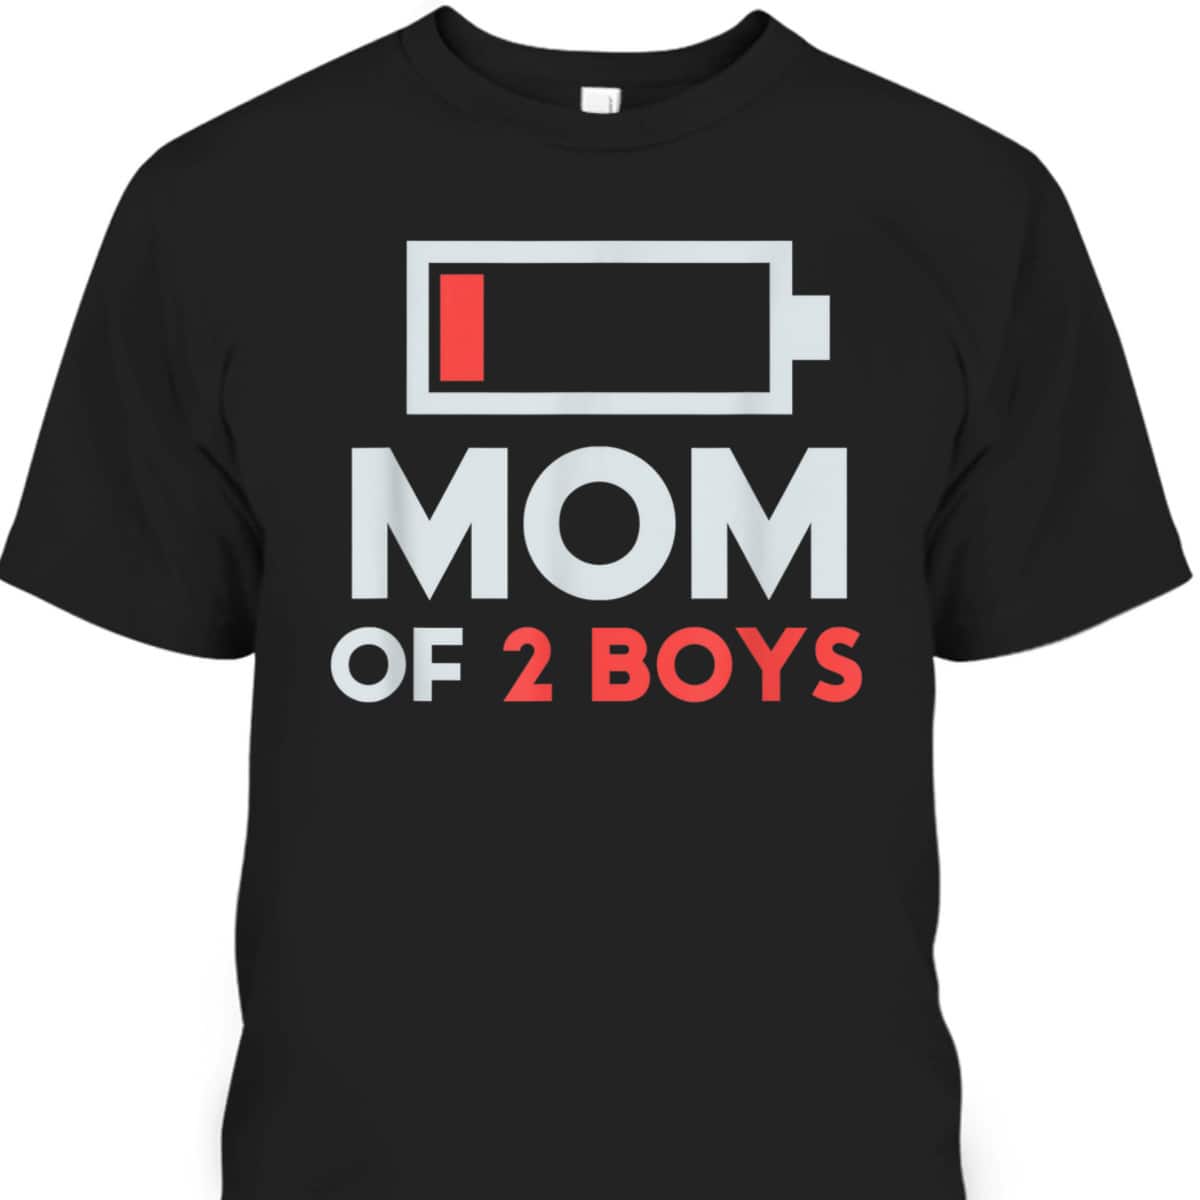 Mom Of 2 Boys Gift From Son Mothers Day Birthday T-Shirt